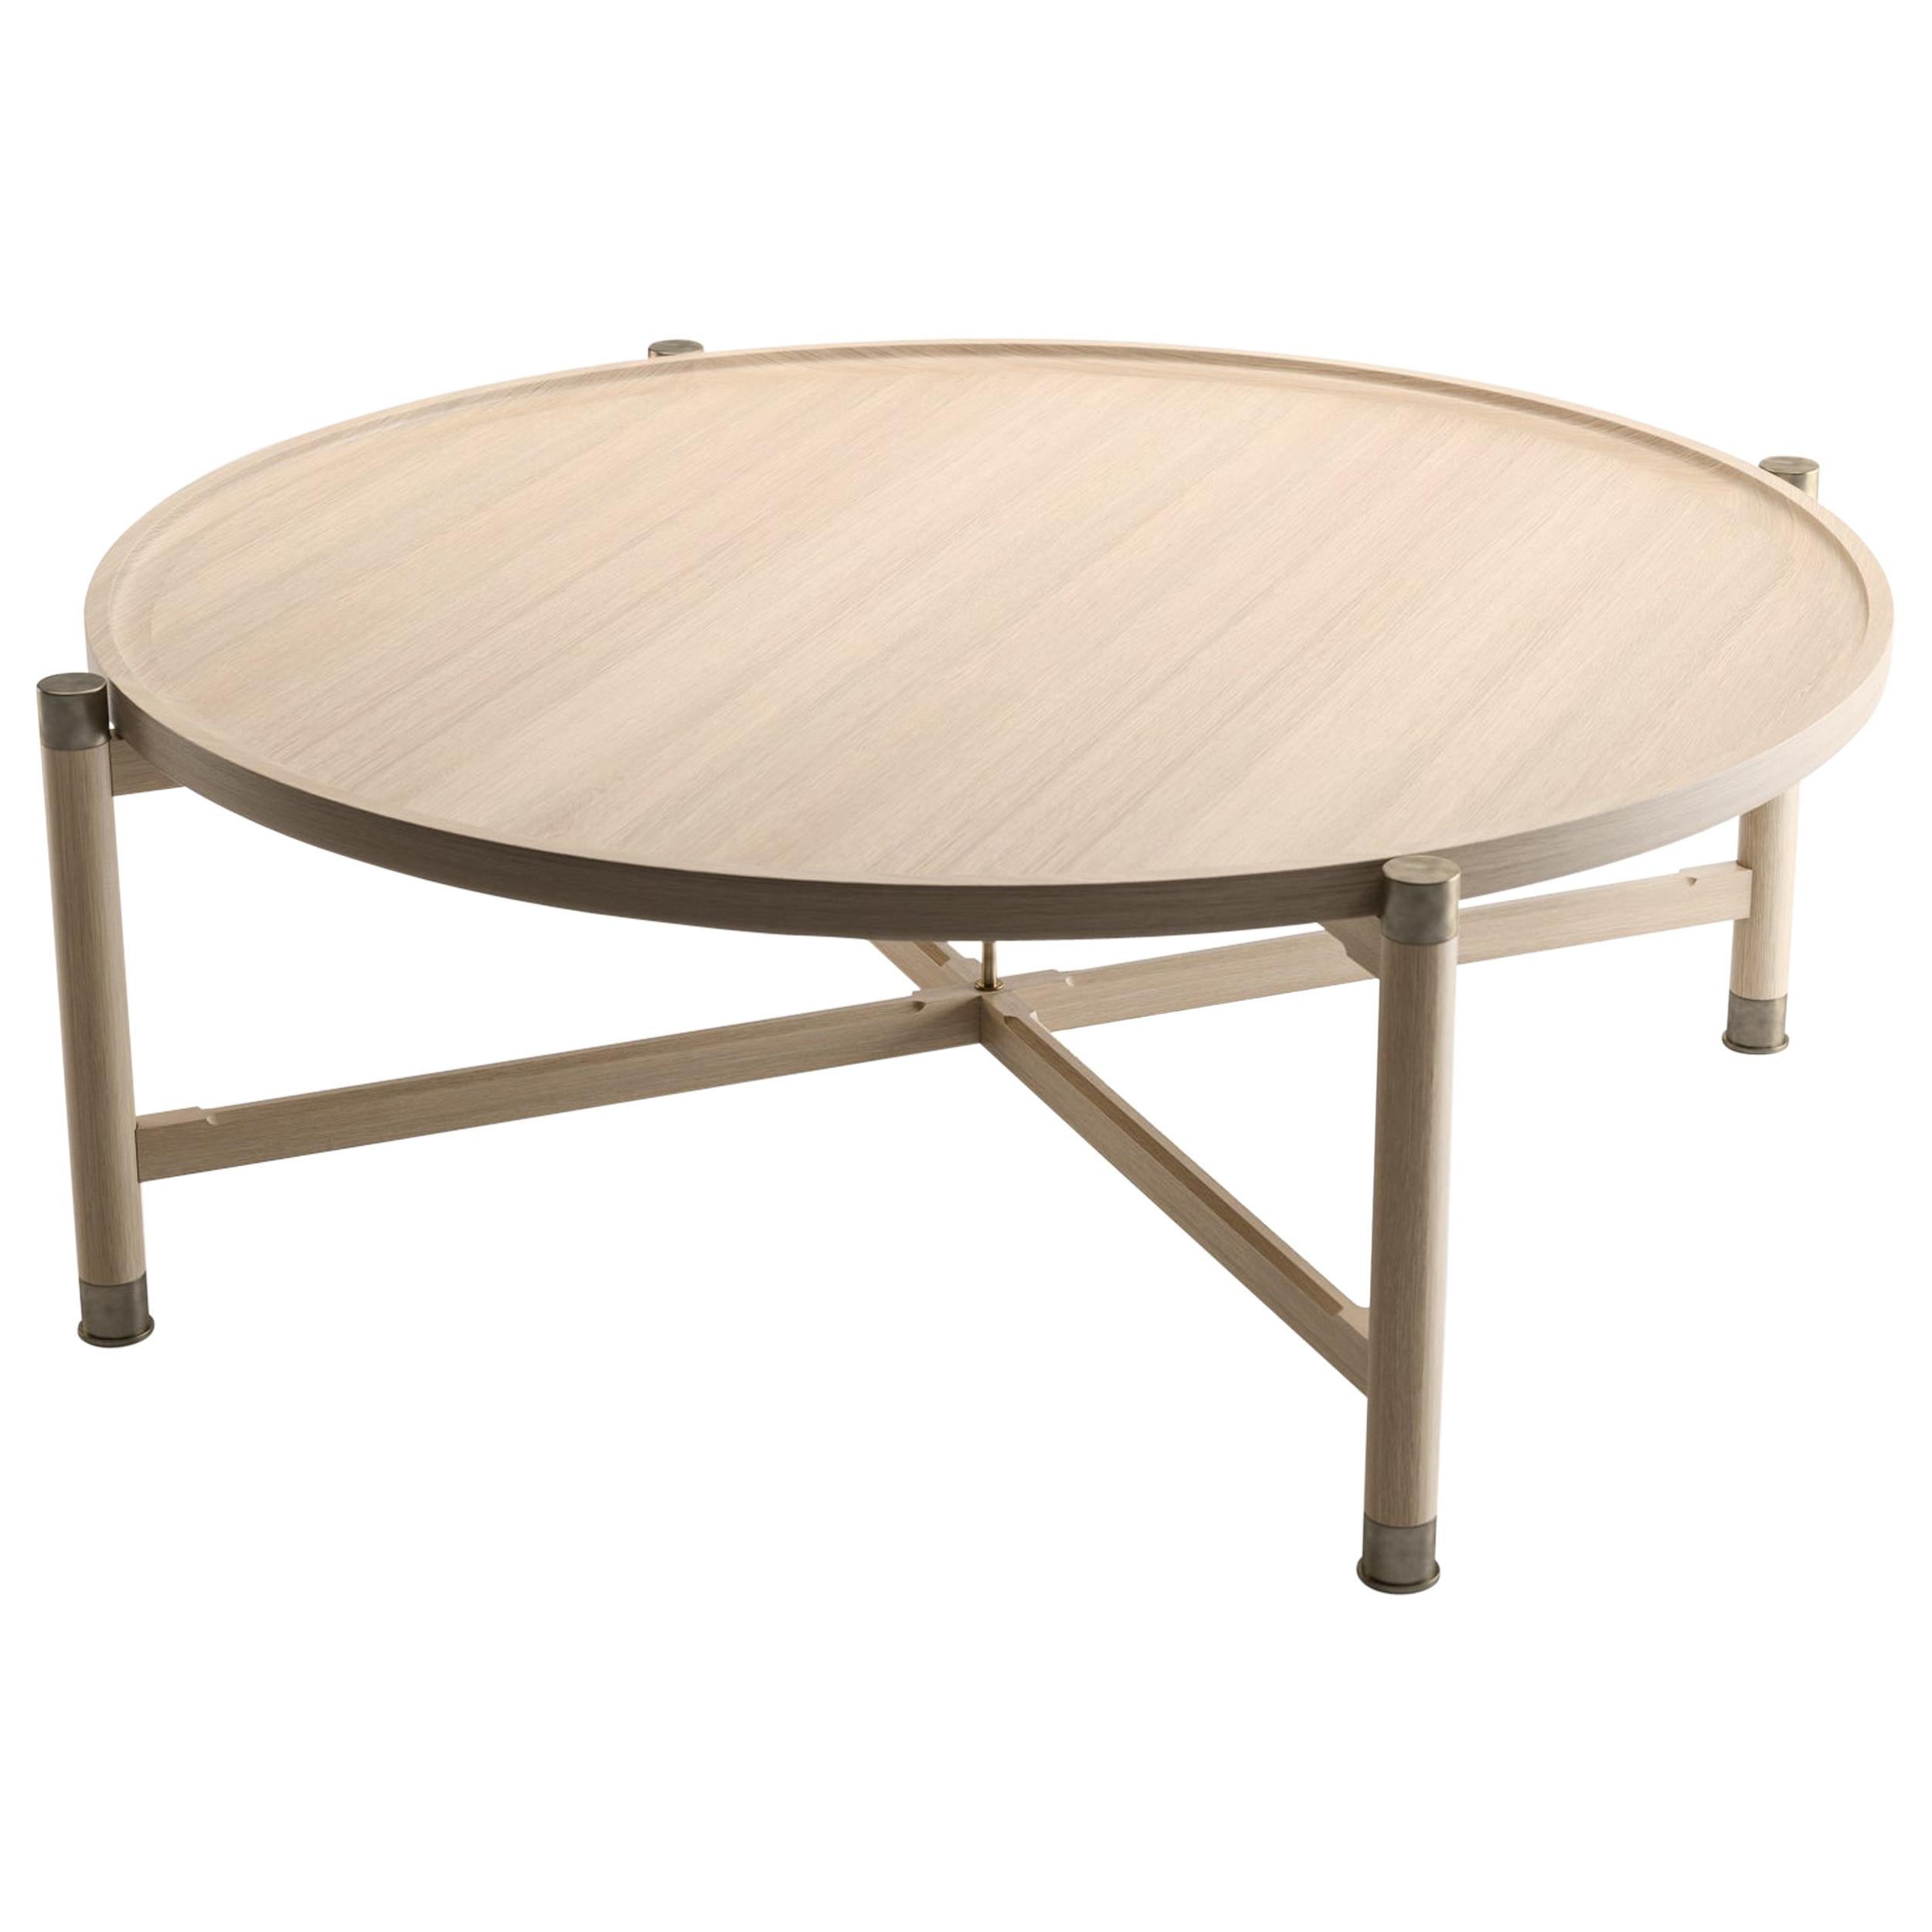 Otto Round Coffee Table in Bleached Oak with Antique Brass Fittings and Stem